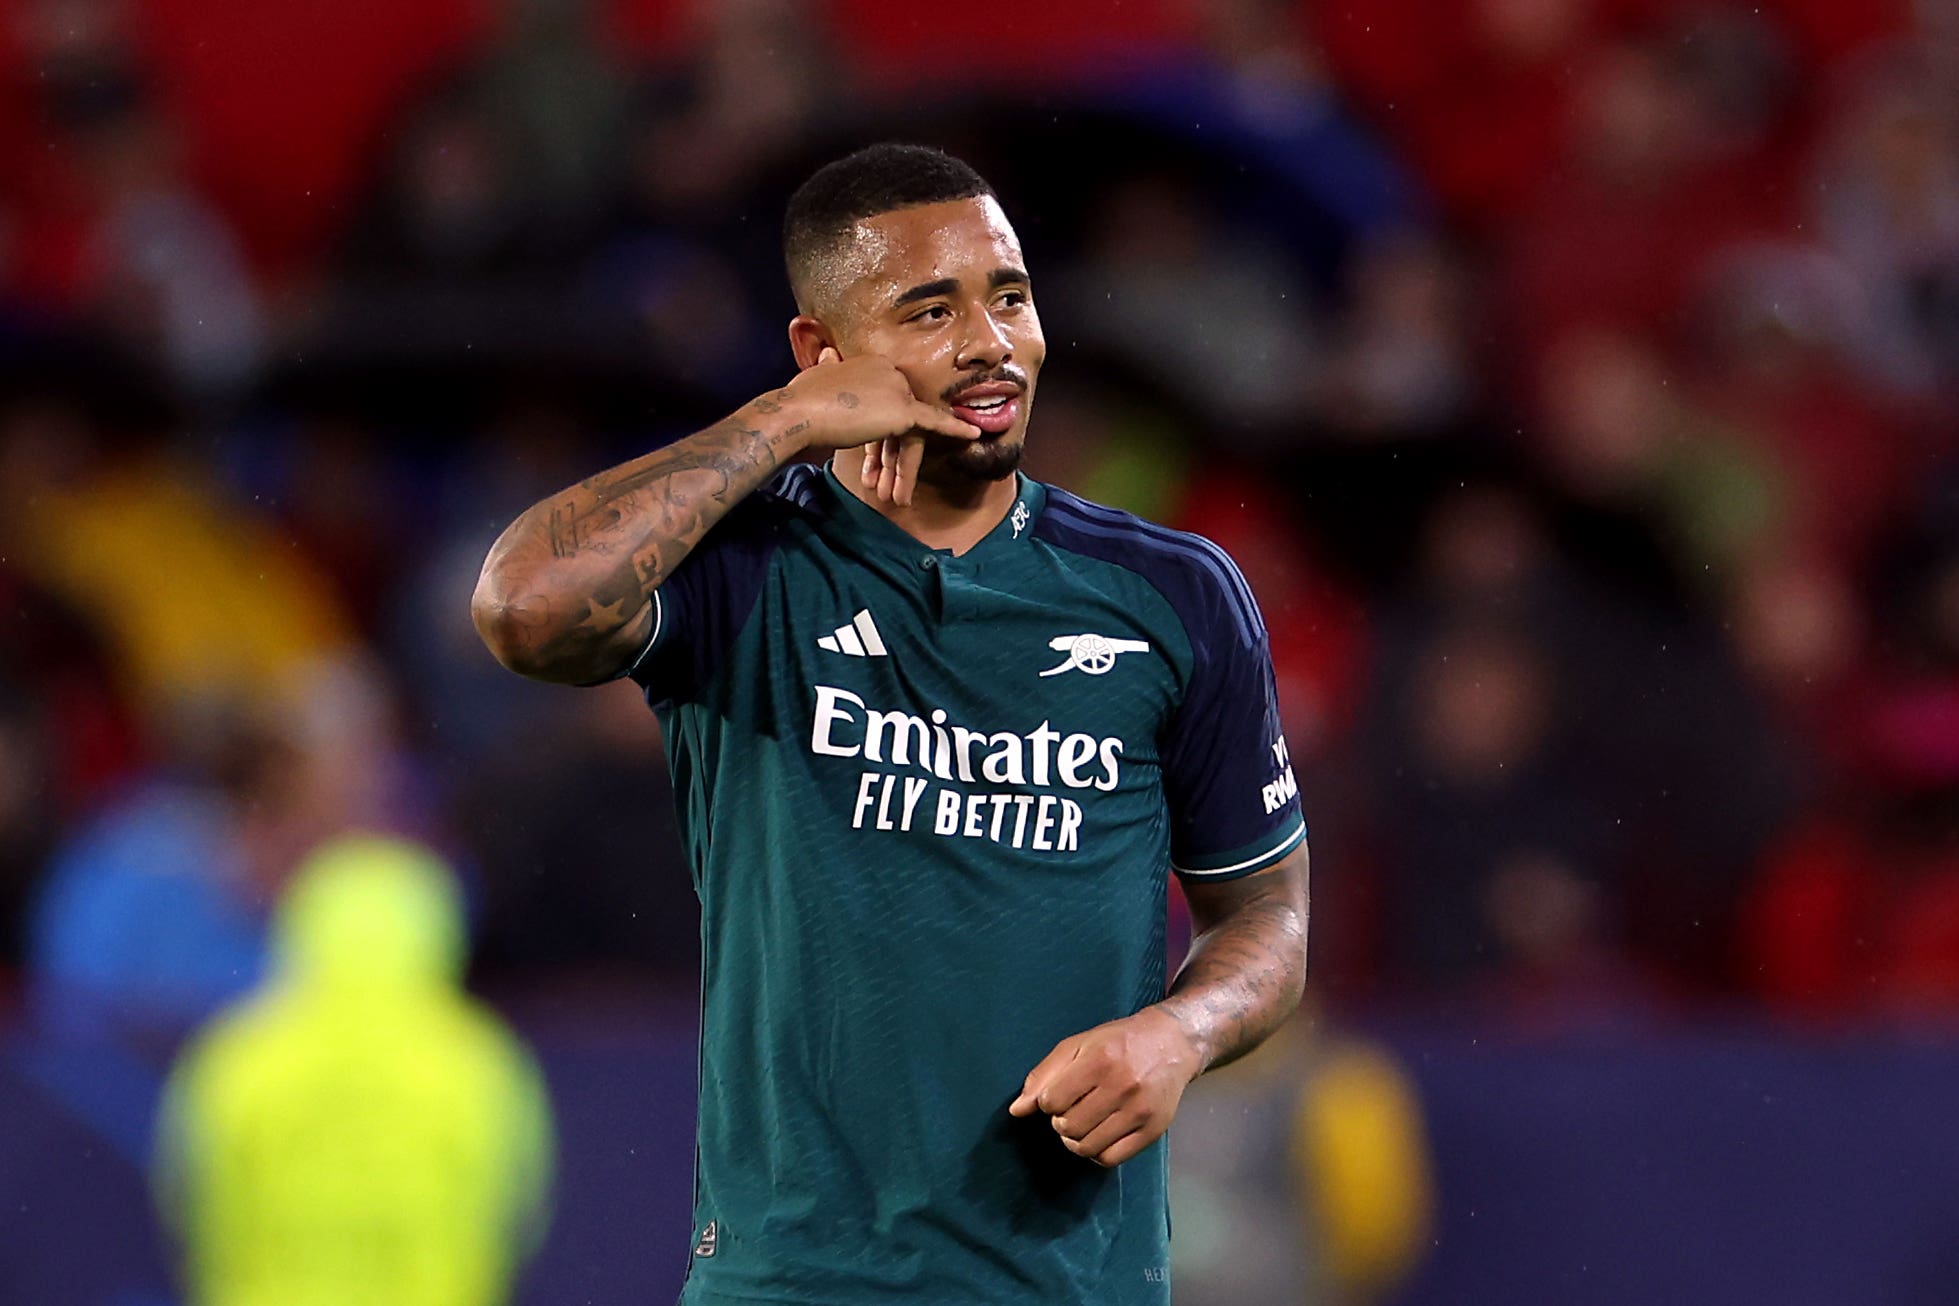 Gabriel Jesus inspires Arsenal to Champions League win over Sevilla | The Independent